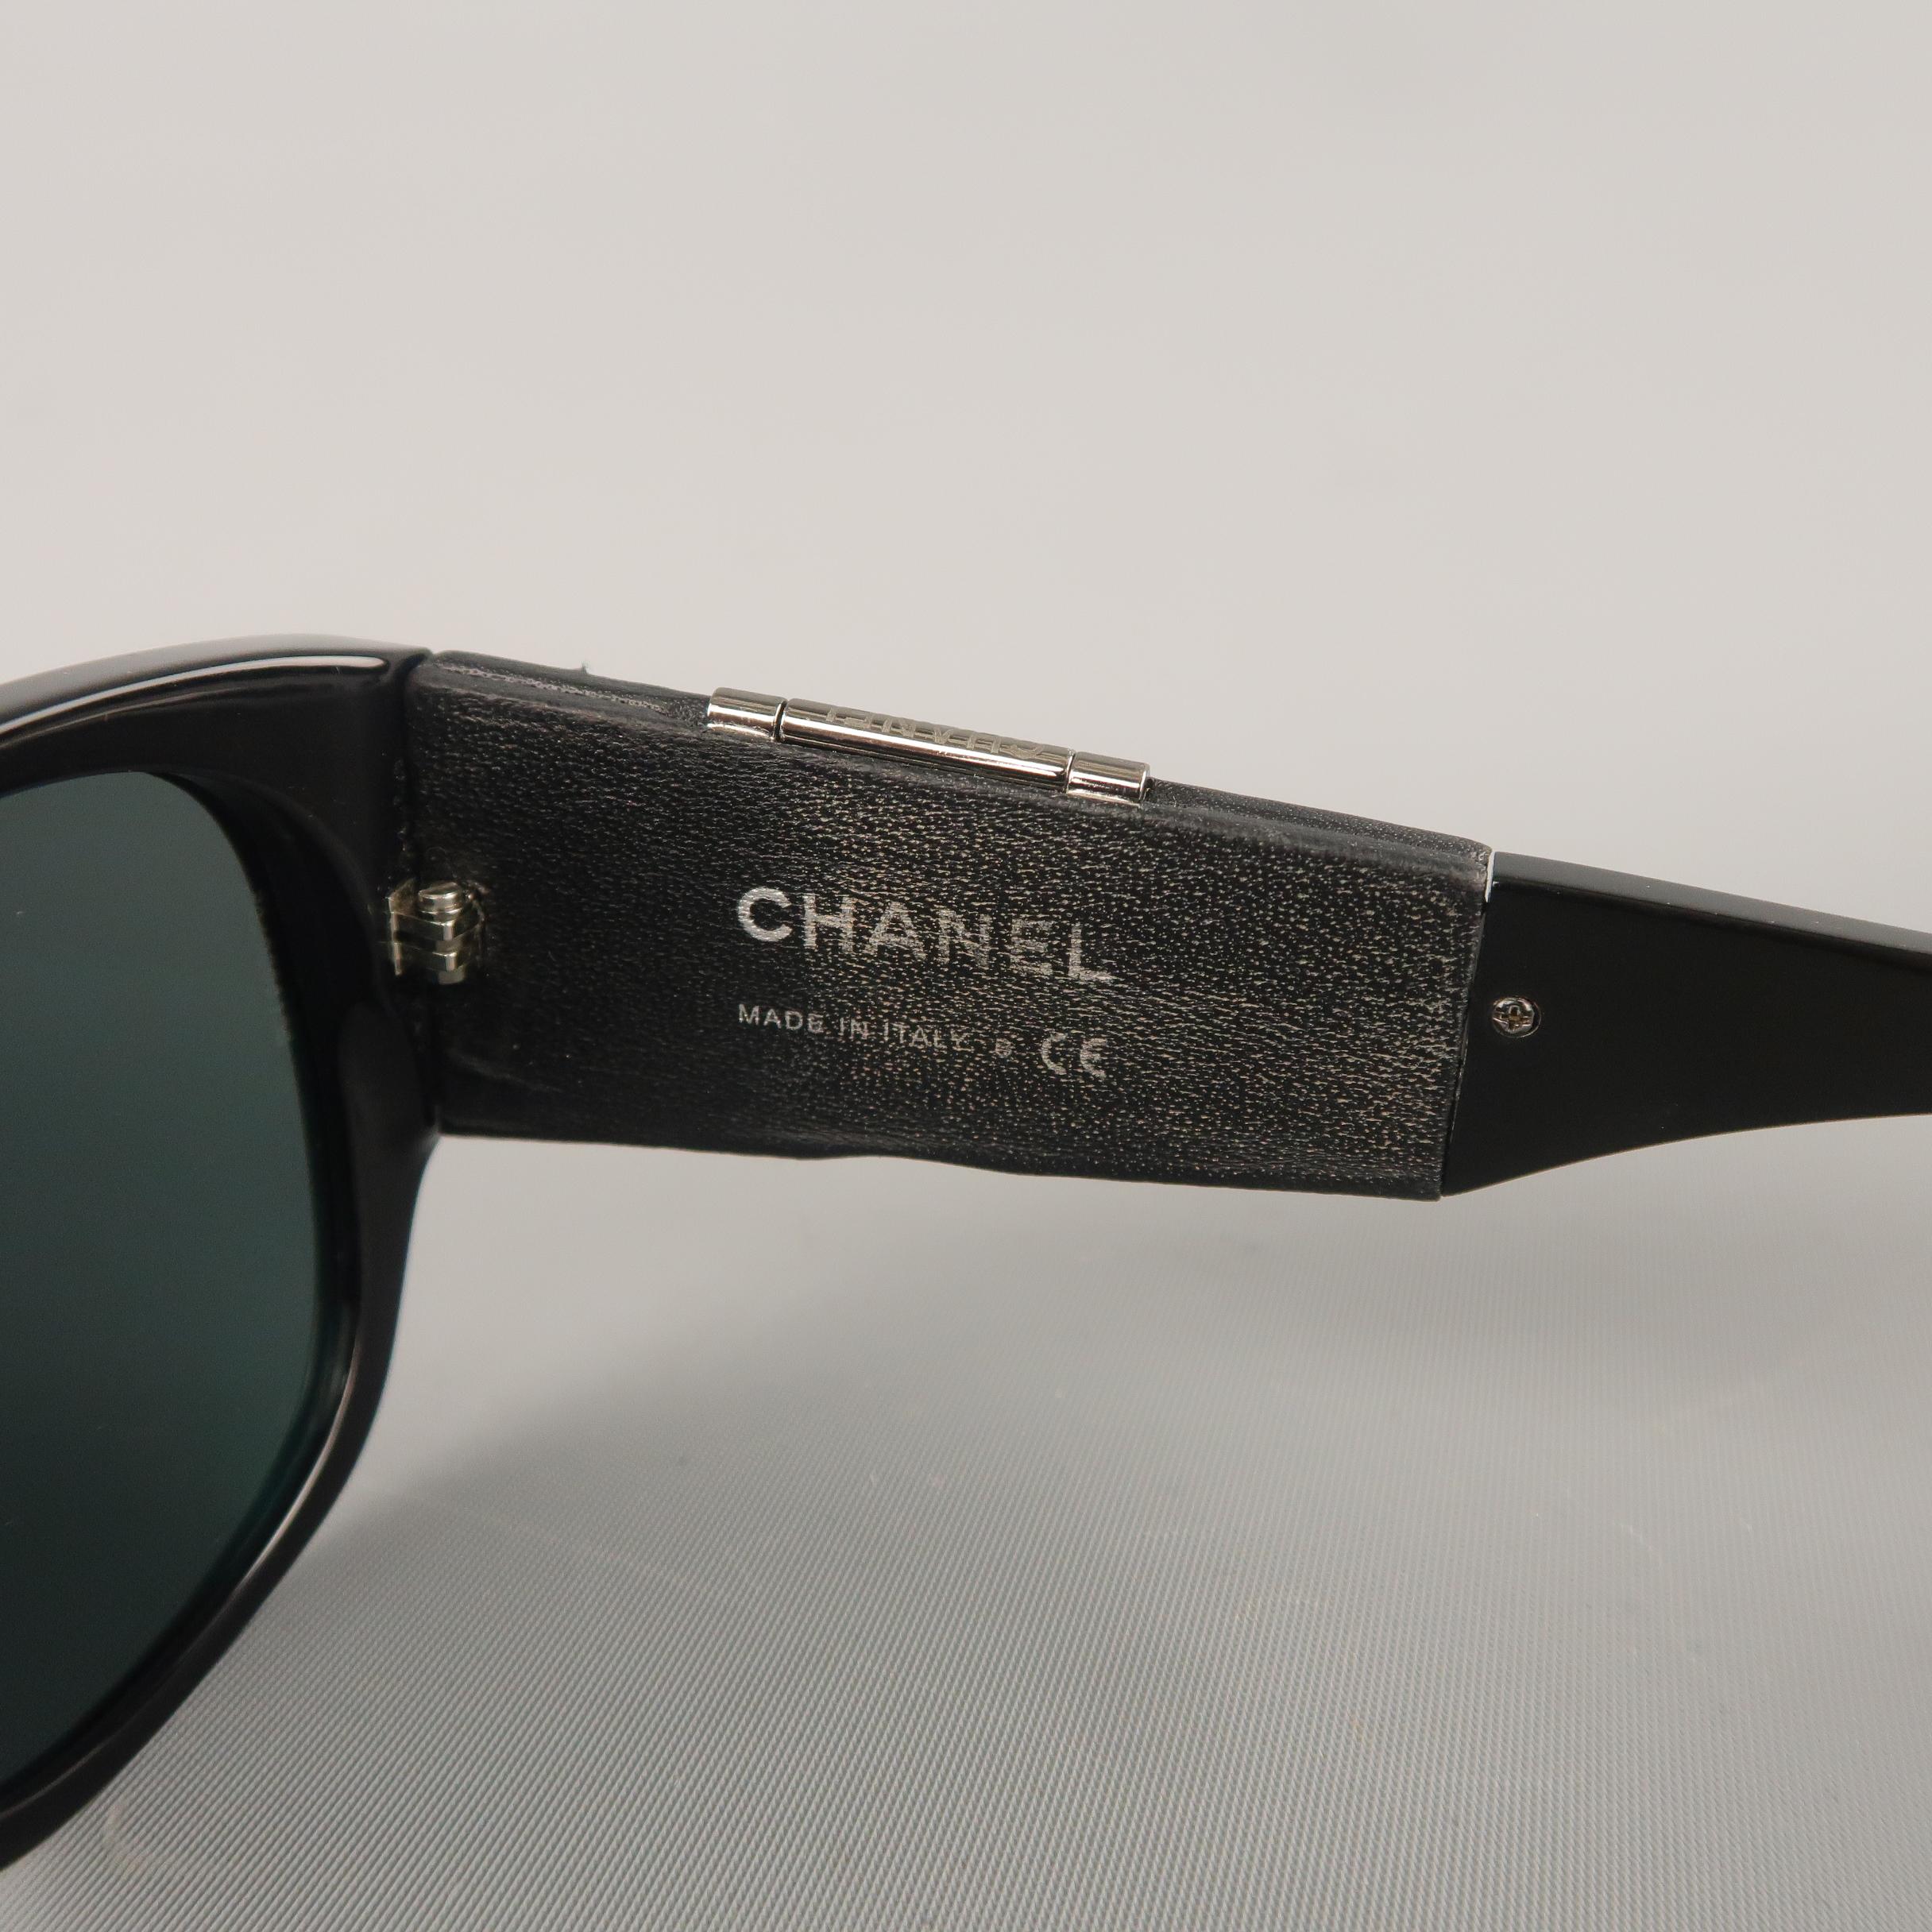  1990's CHANEL Black Quilted Leather Flip Up Mirror Arm 5202 Sunglasses 6